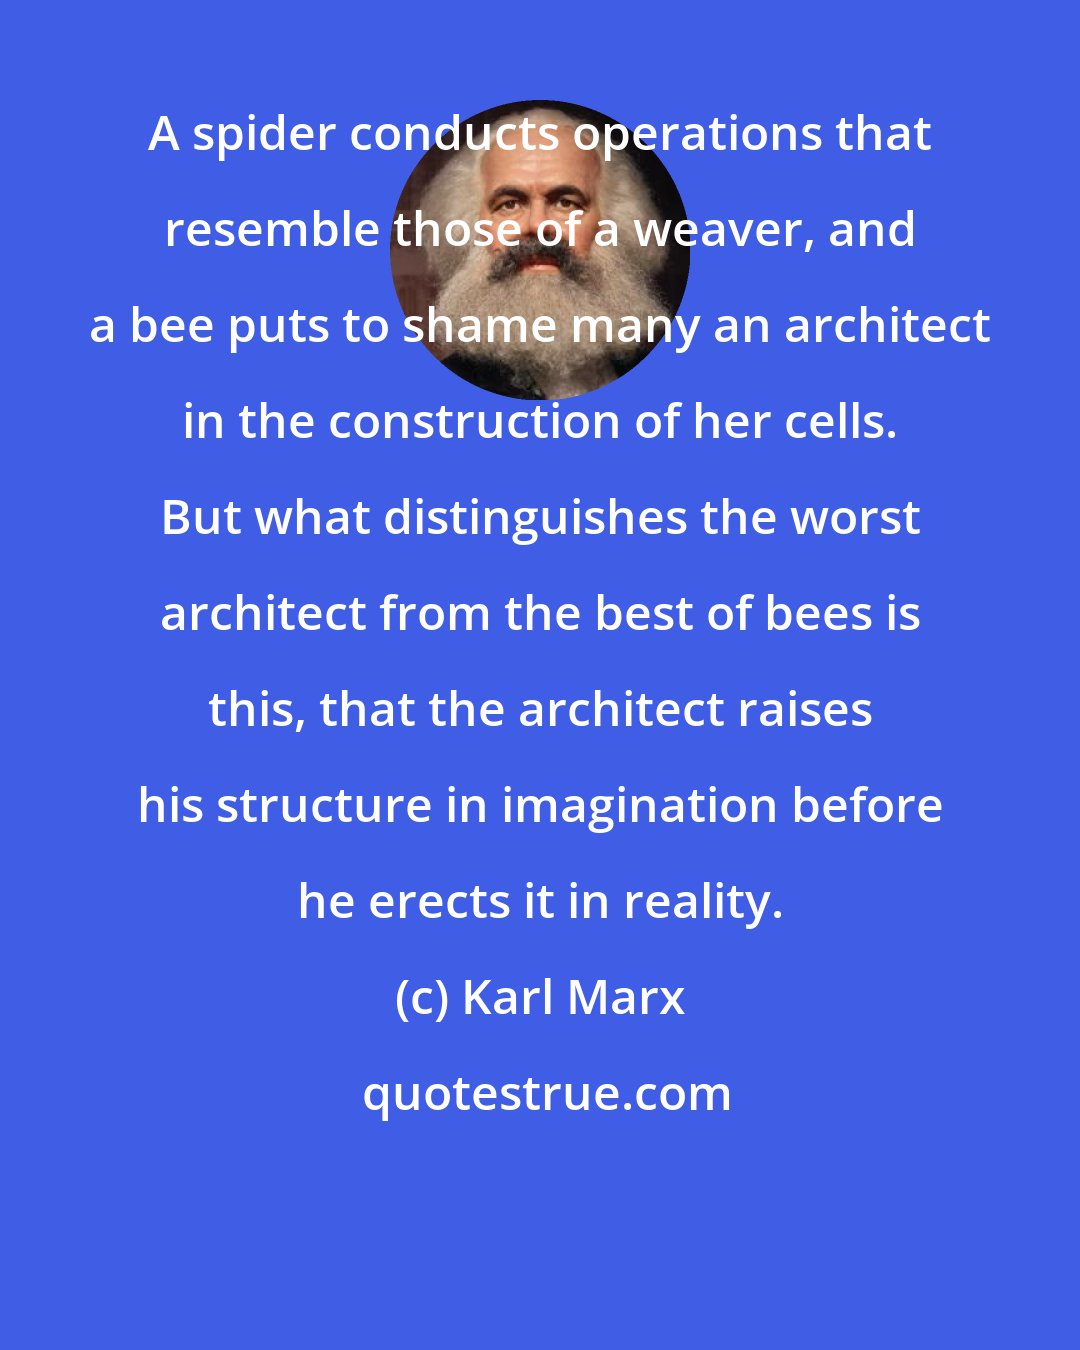 Karl Marx: A spider conducts operations that resemble those of a weaver, and a bee puts to shame many an architect in the construction of her cells. But what distinguishes the worst architect from the best of bees is this, that the architect raises his structure in imagination before he erects it in reality.